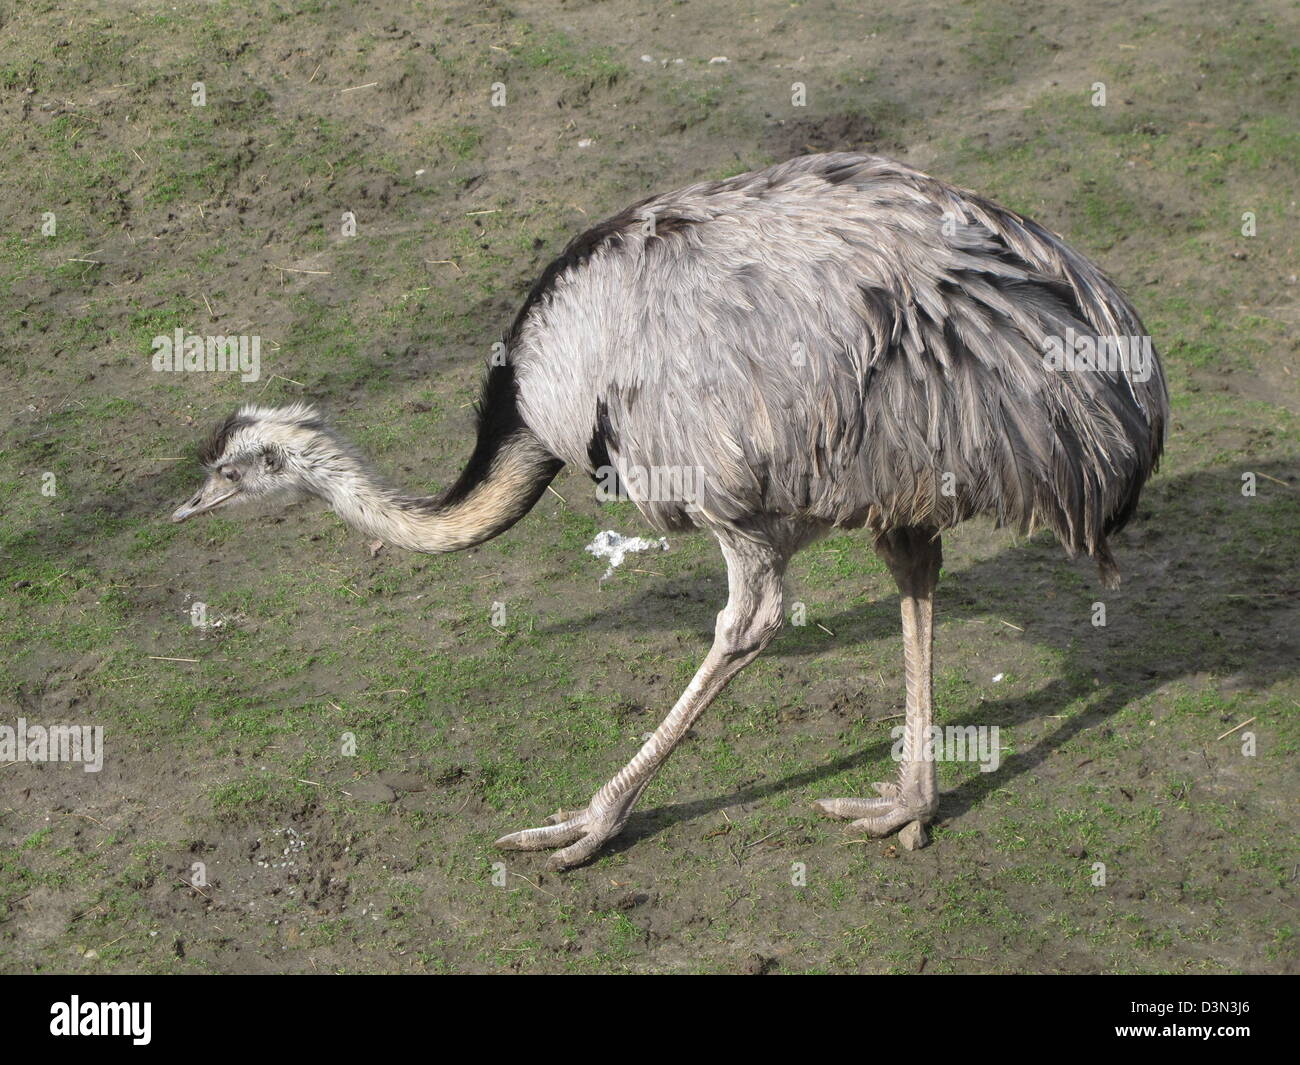 full image of a rhea on a meadow in the zoo of Copenhagen Stock Photo